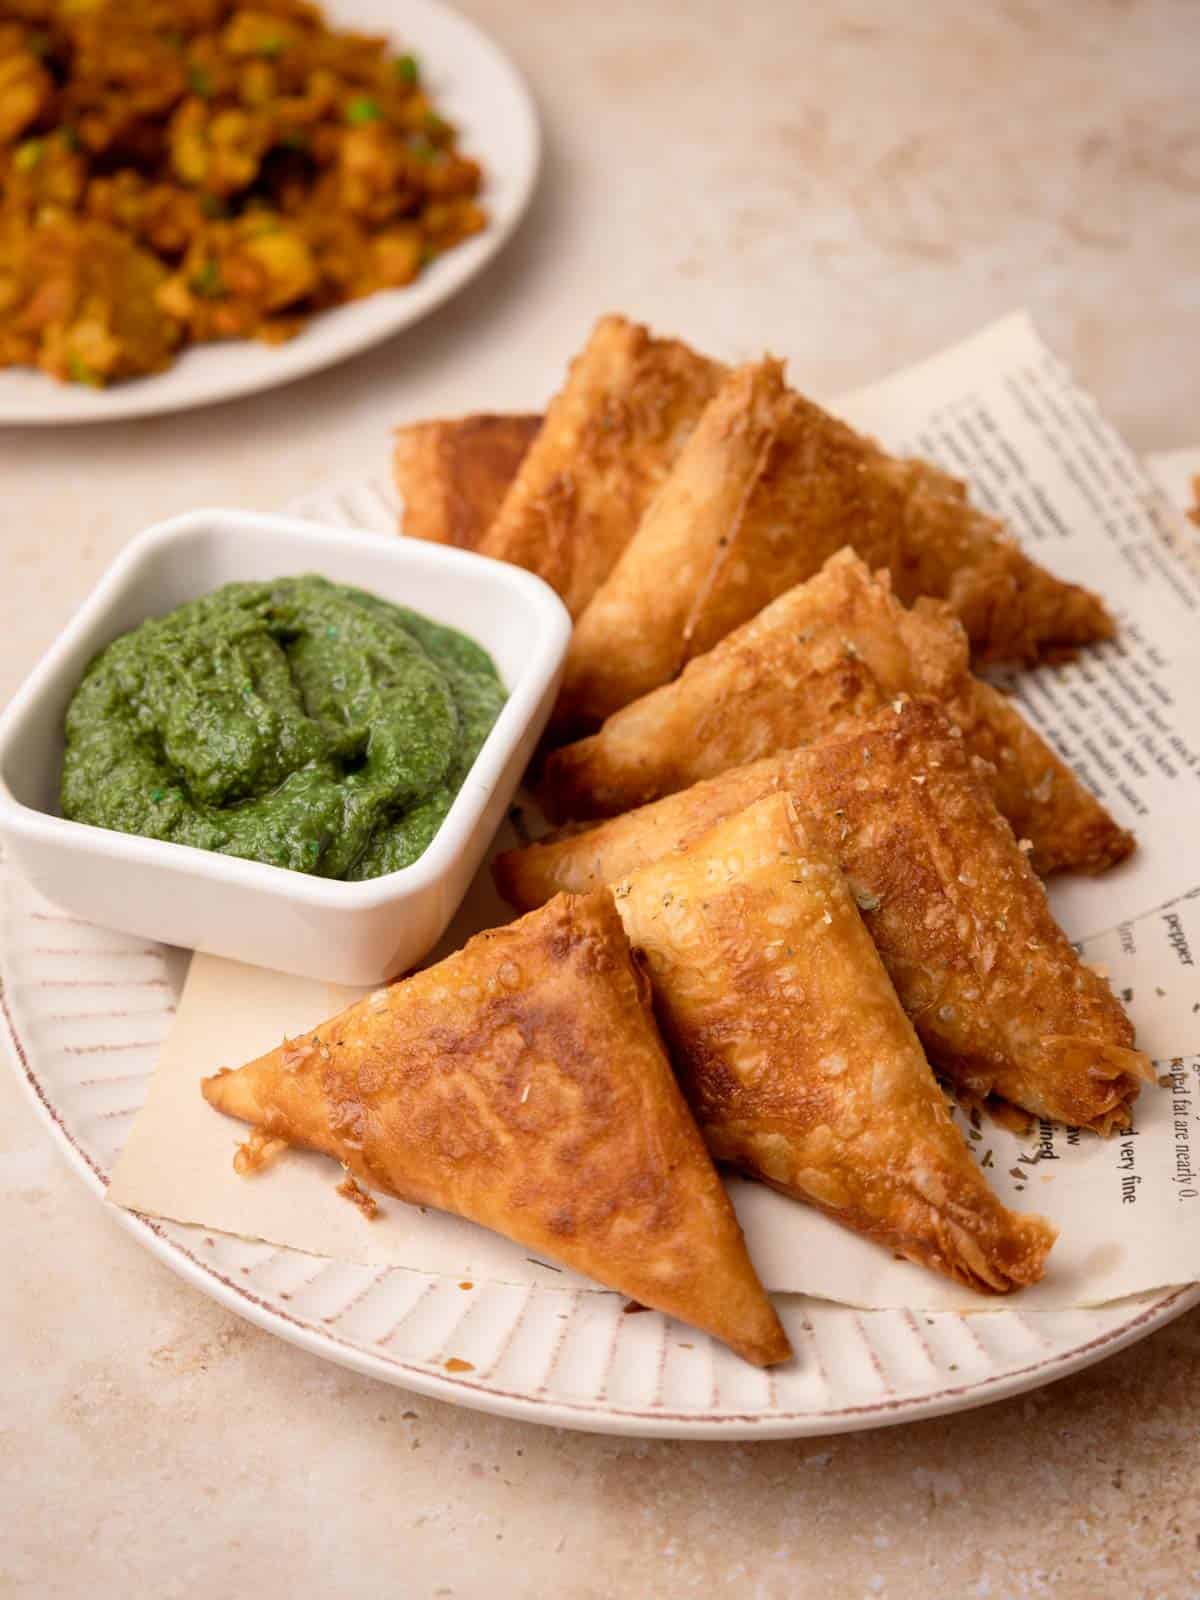 Cocktail Samosa assembled on a plate with coriander chutney.